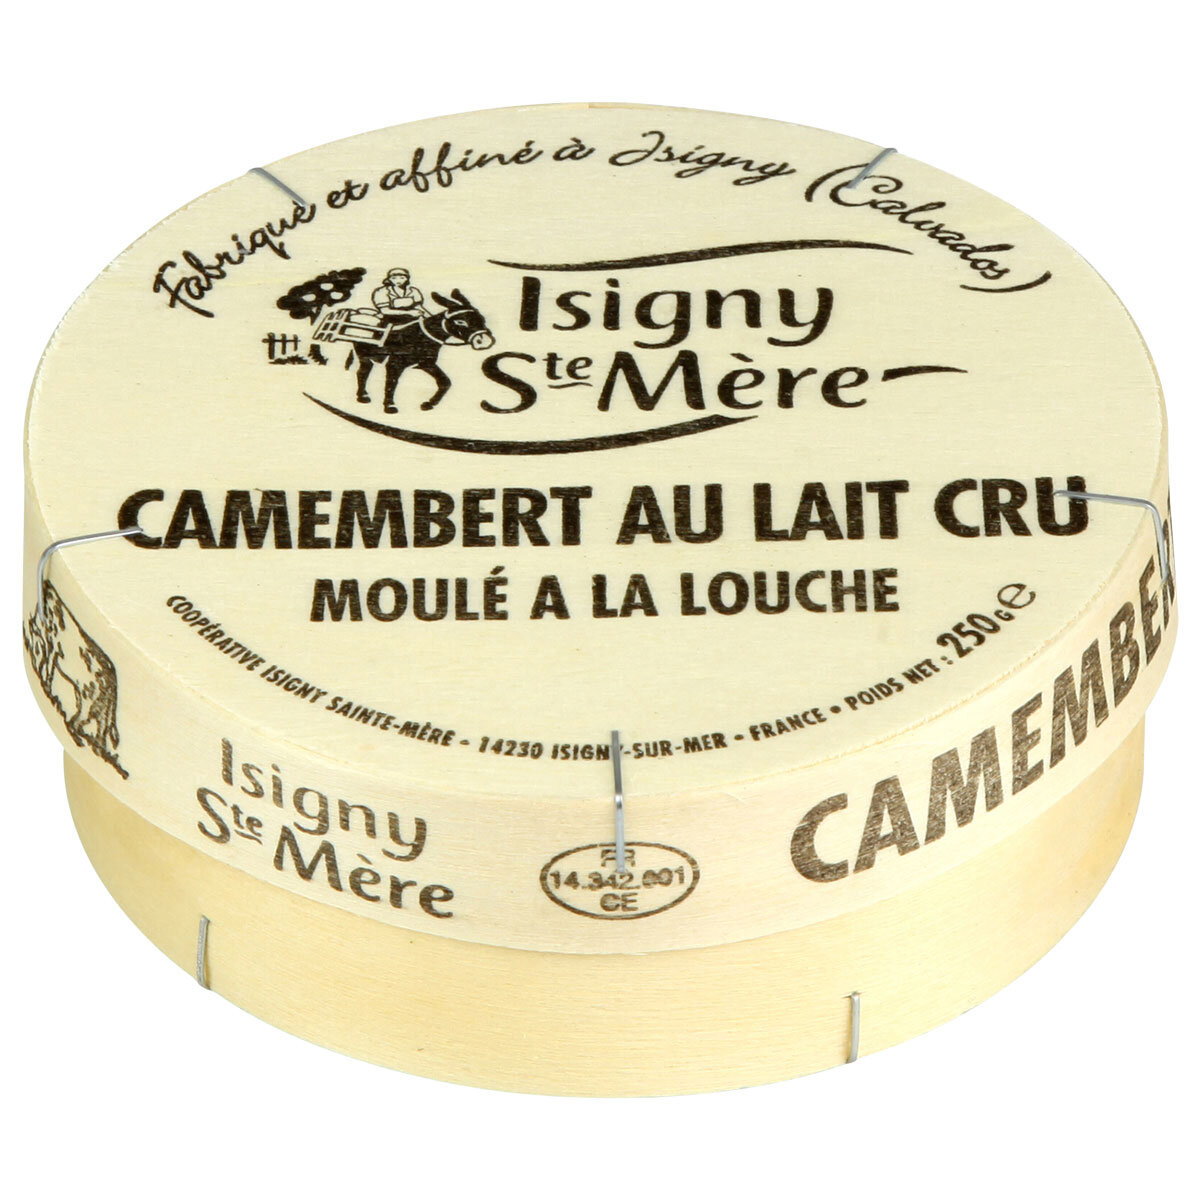 Oven-baked Camembert - Isigny Sainte-Mère